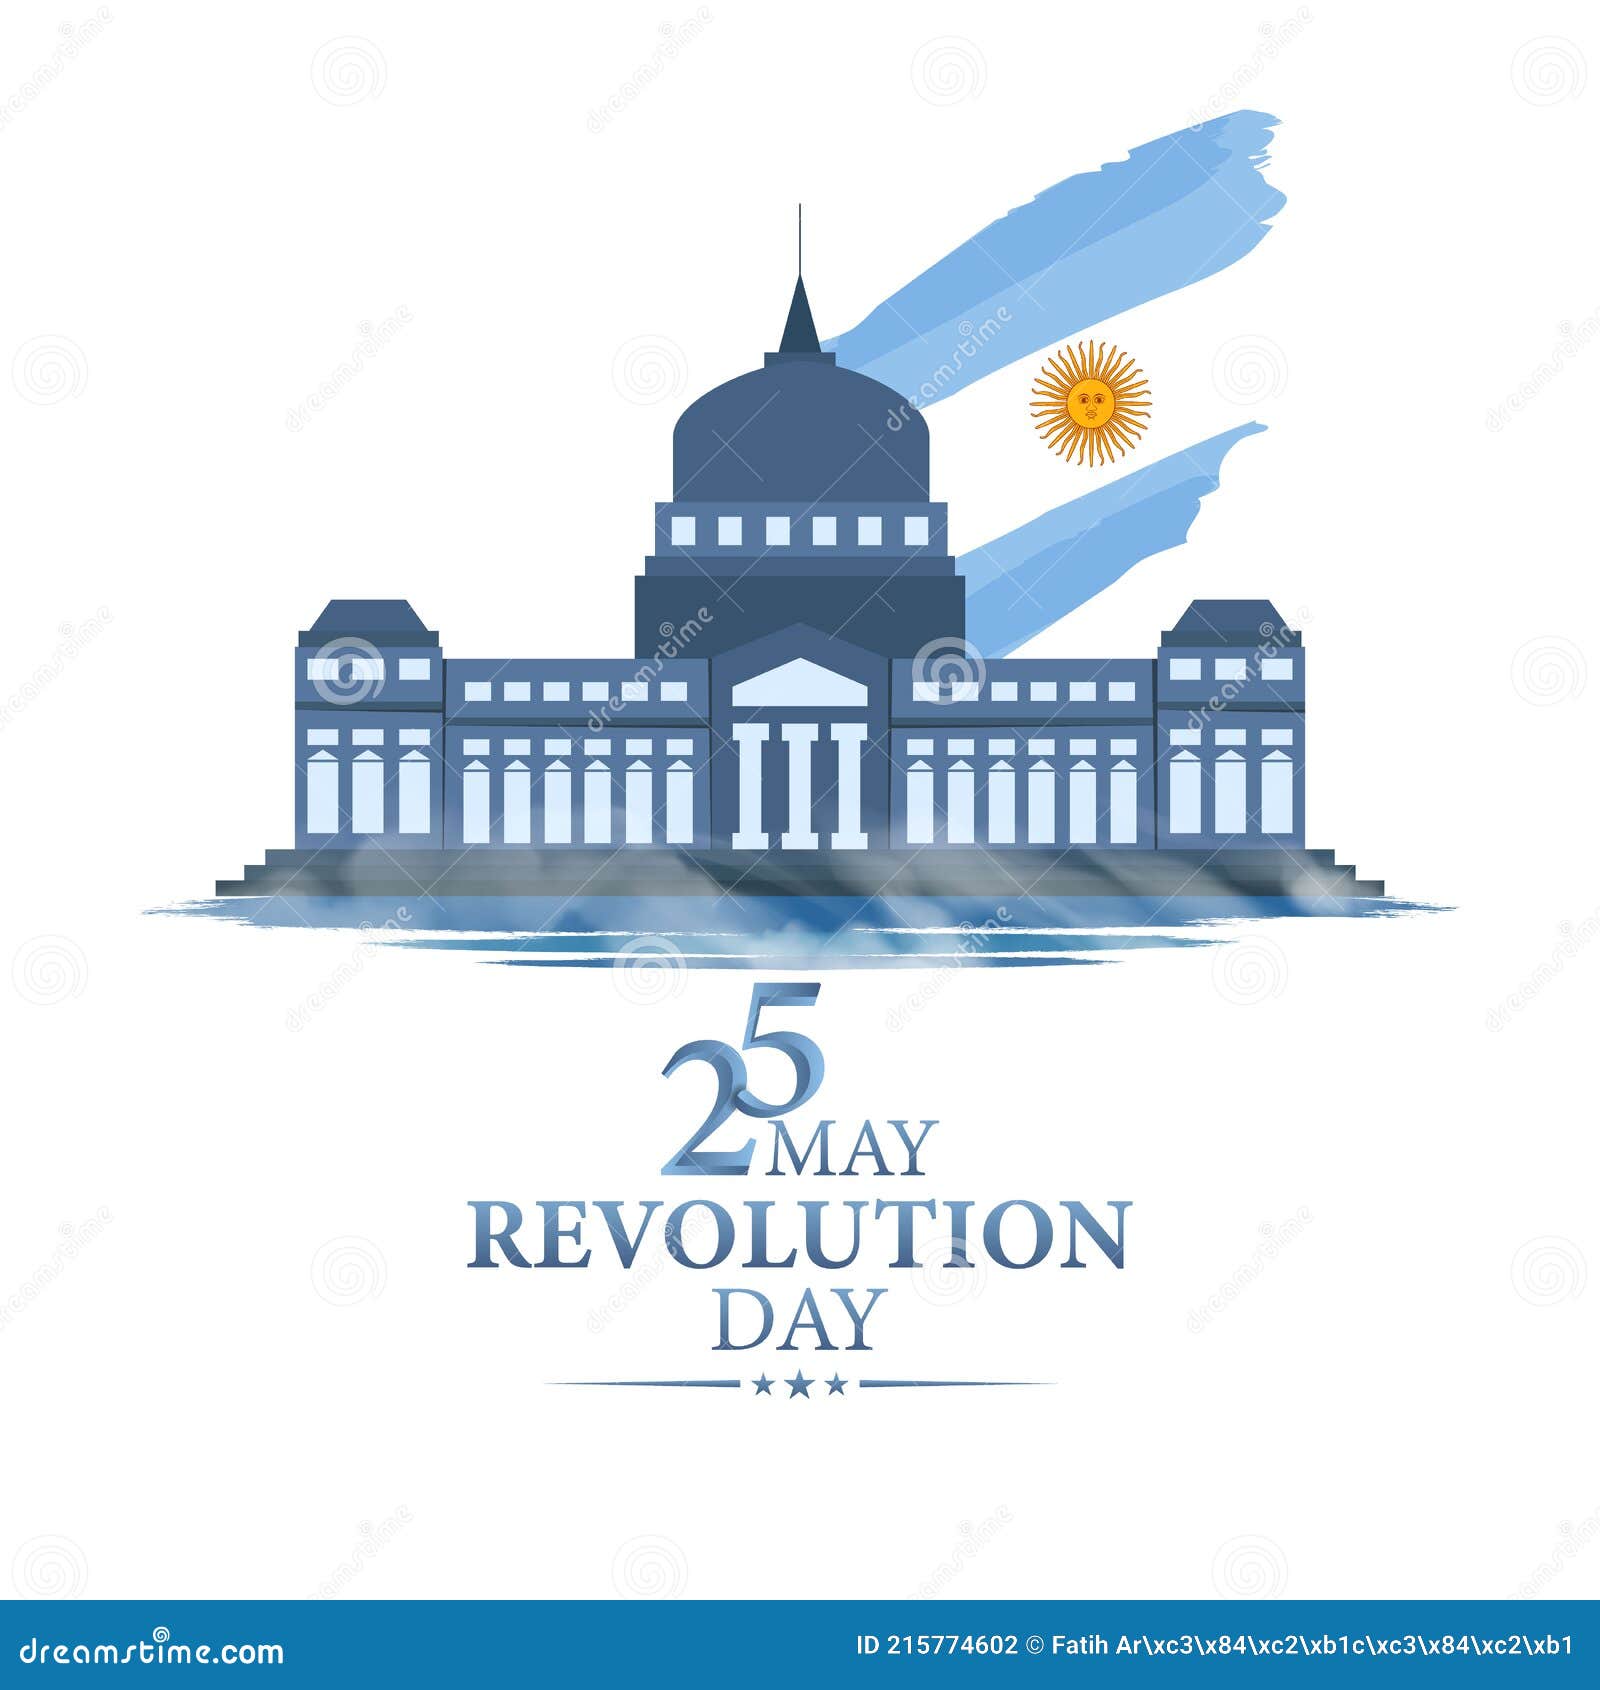 May 25 is the Day of the Argentine Revolution. Argentine Parliament Building and Flag. Card, Banner, Poster, Background Design. Ve Stock Vector - Illustration of freedom, greeting: 215774602